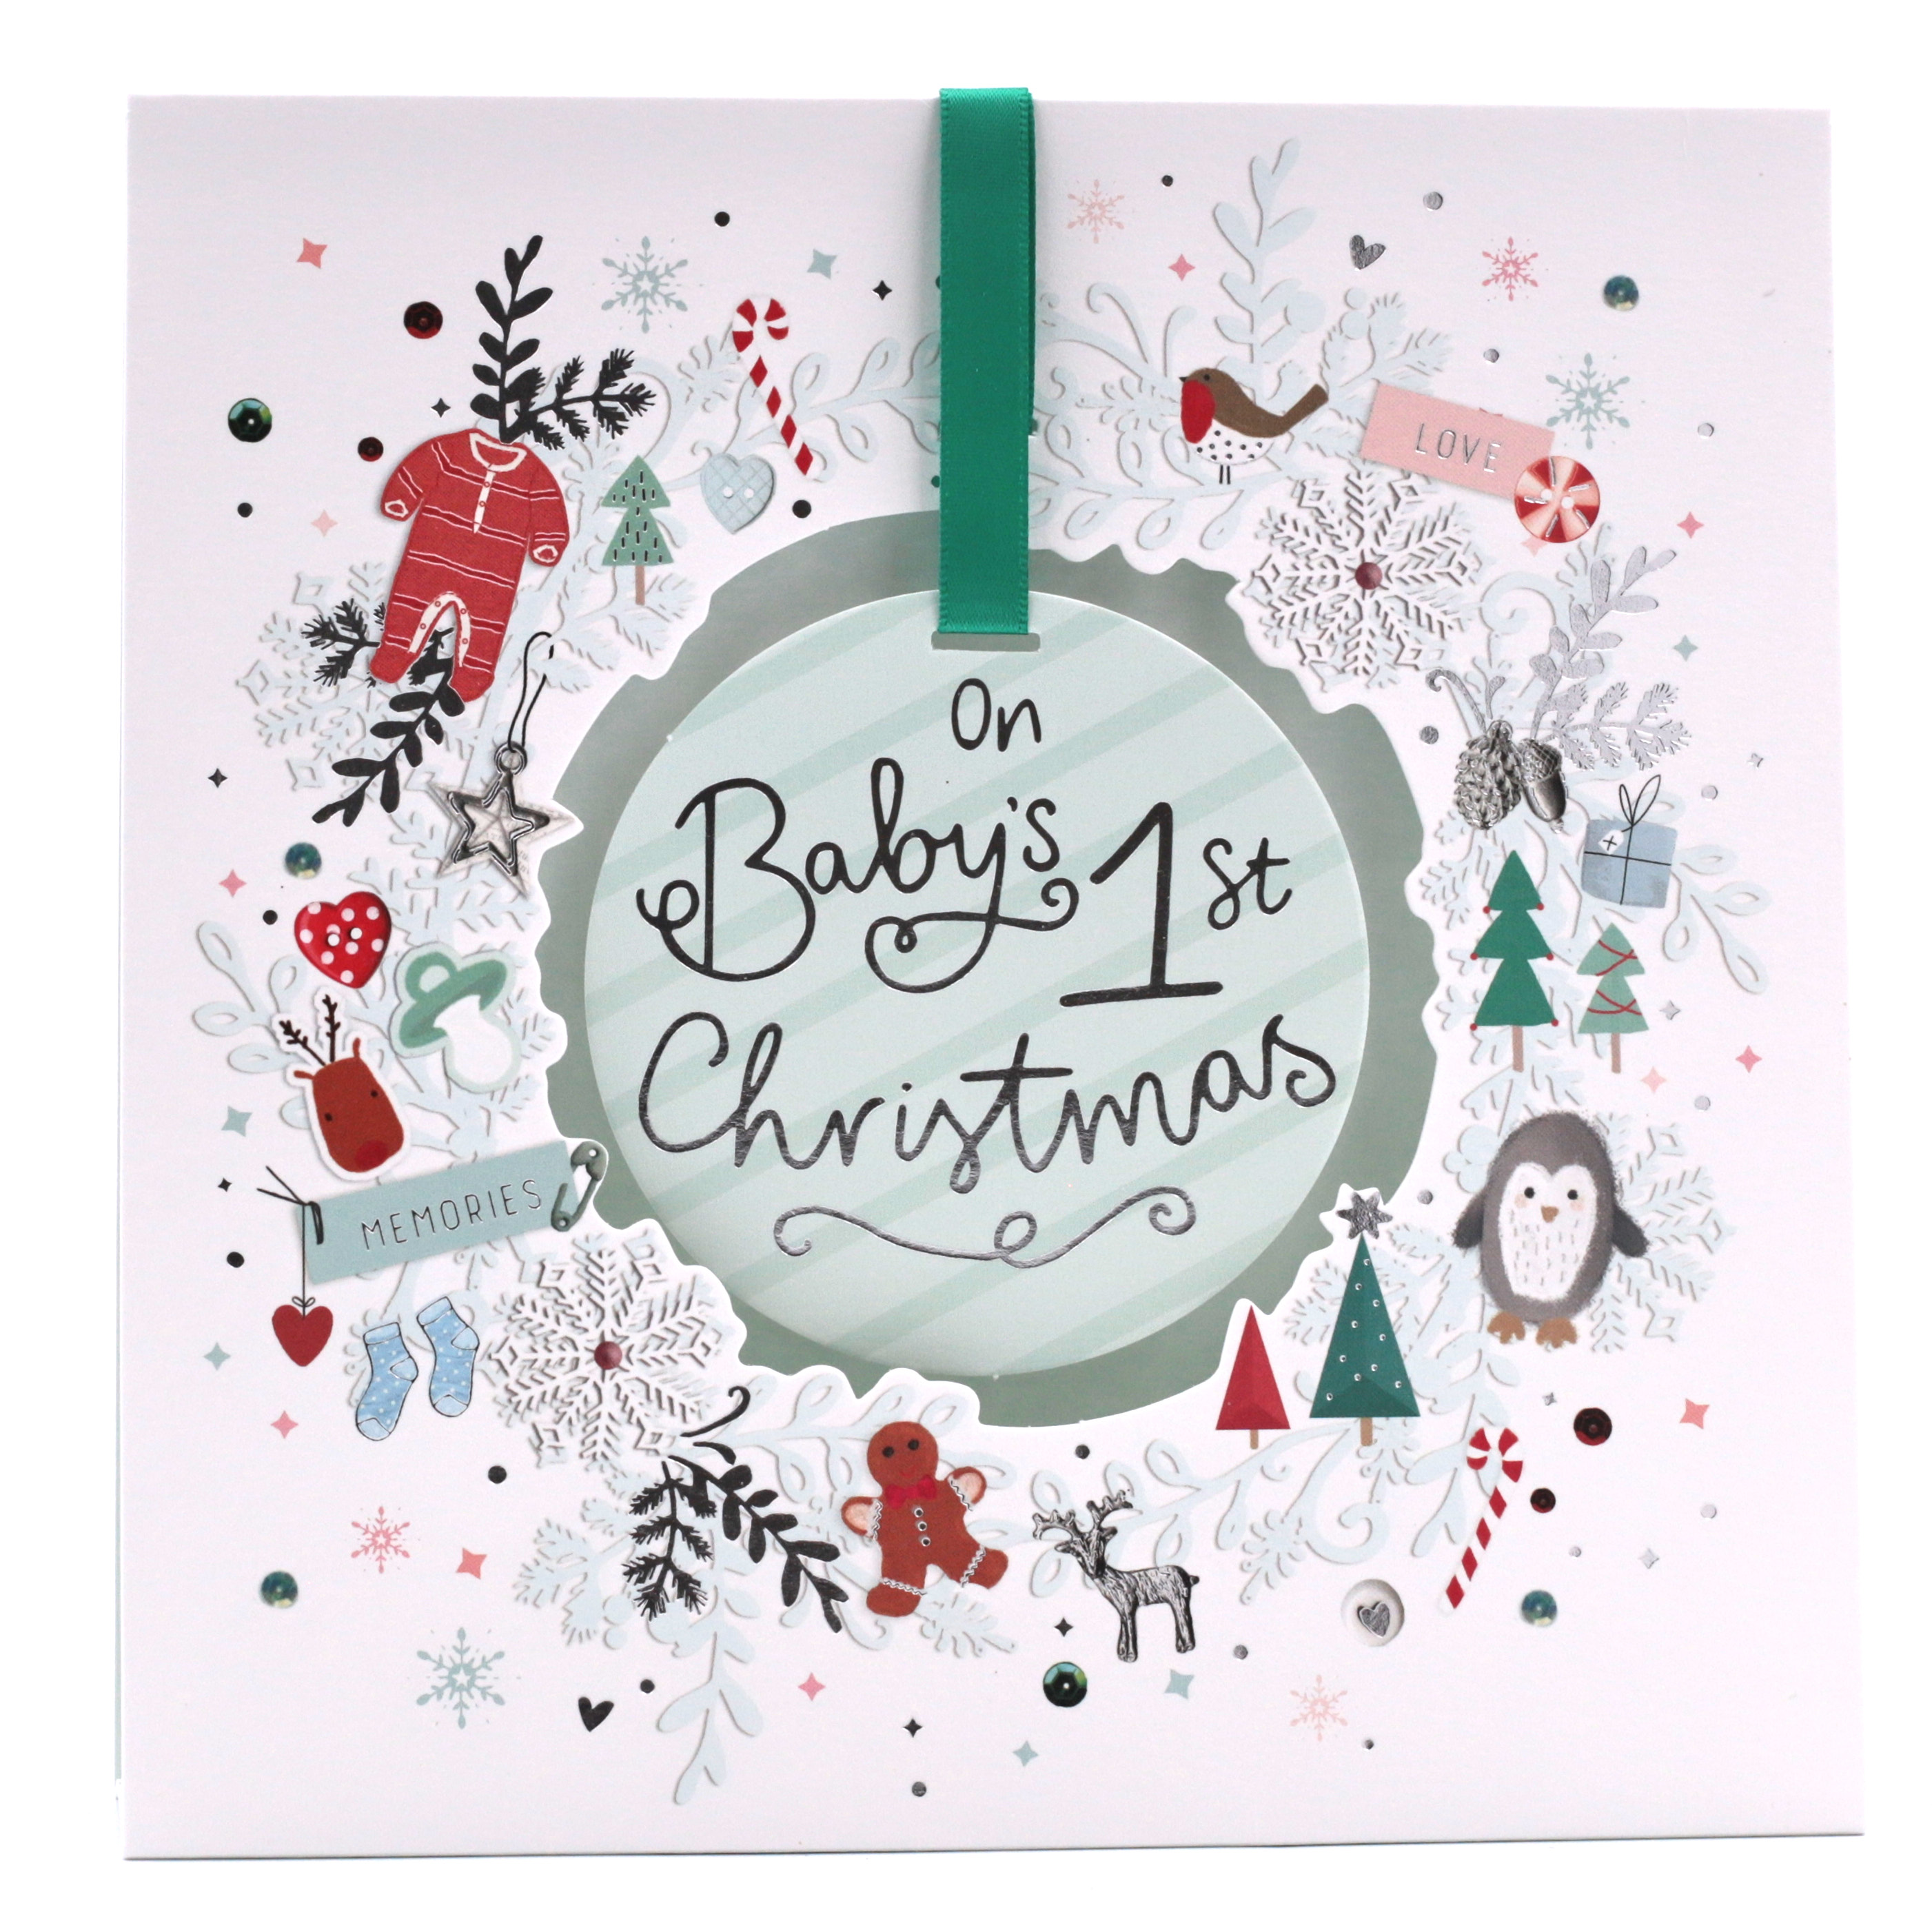 Exquisite Collection Christmas Card - BabyÃ¢â‚¬â„¢s First Christmas